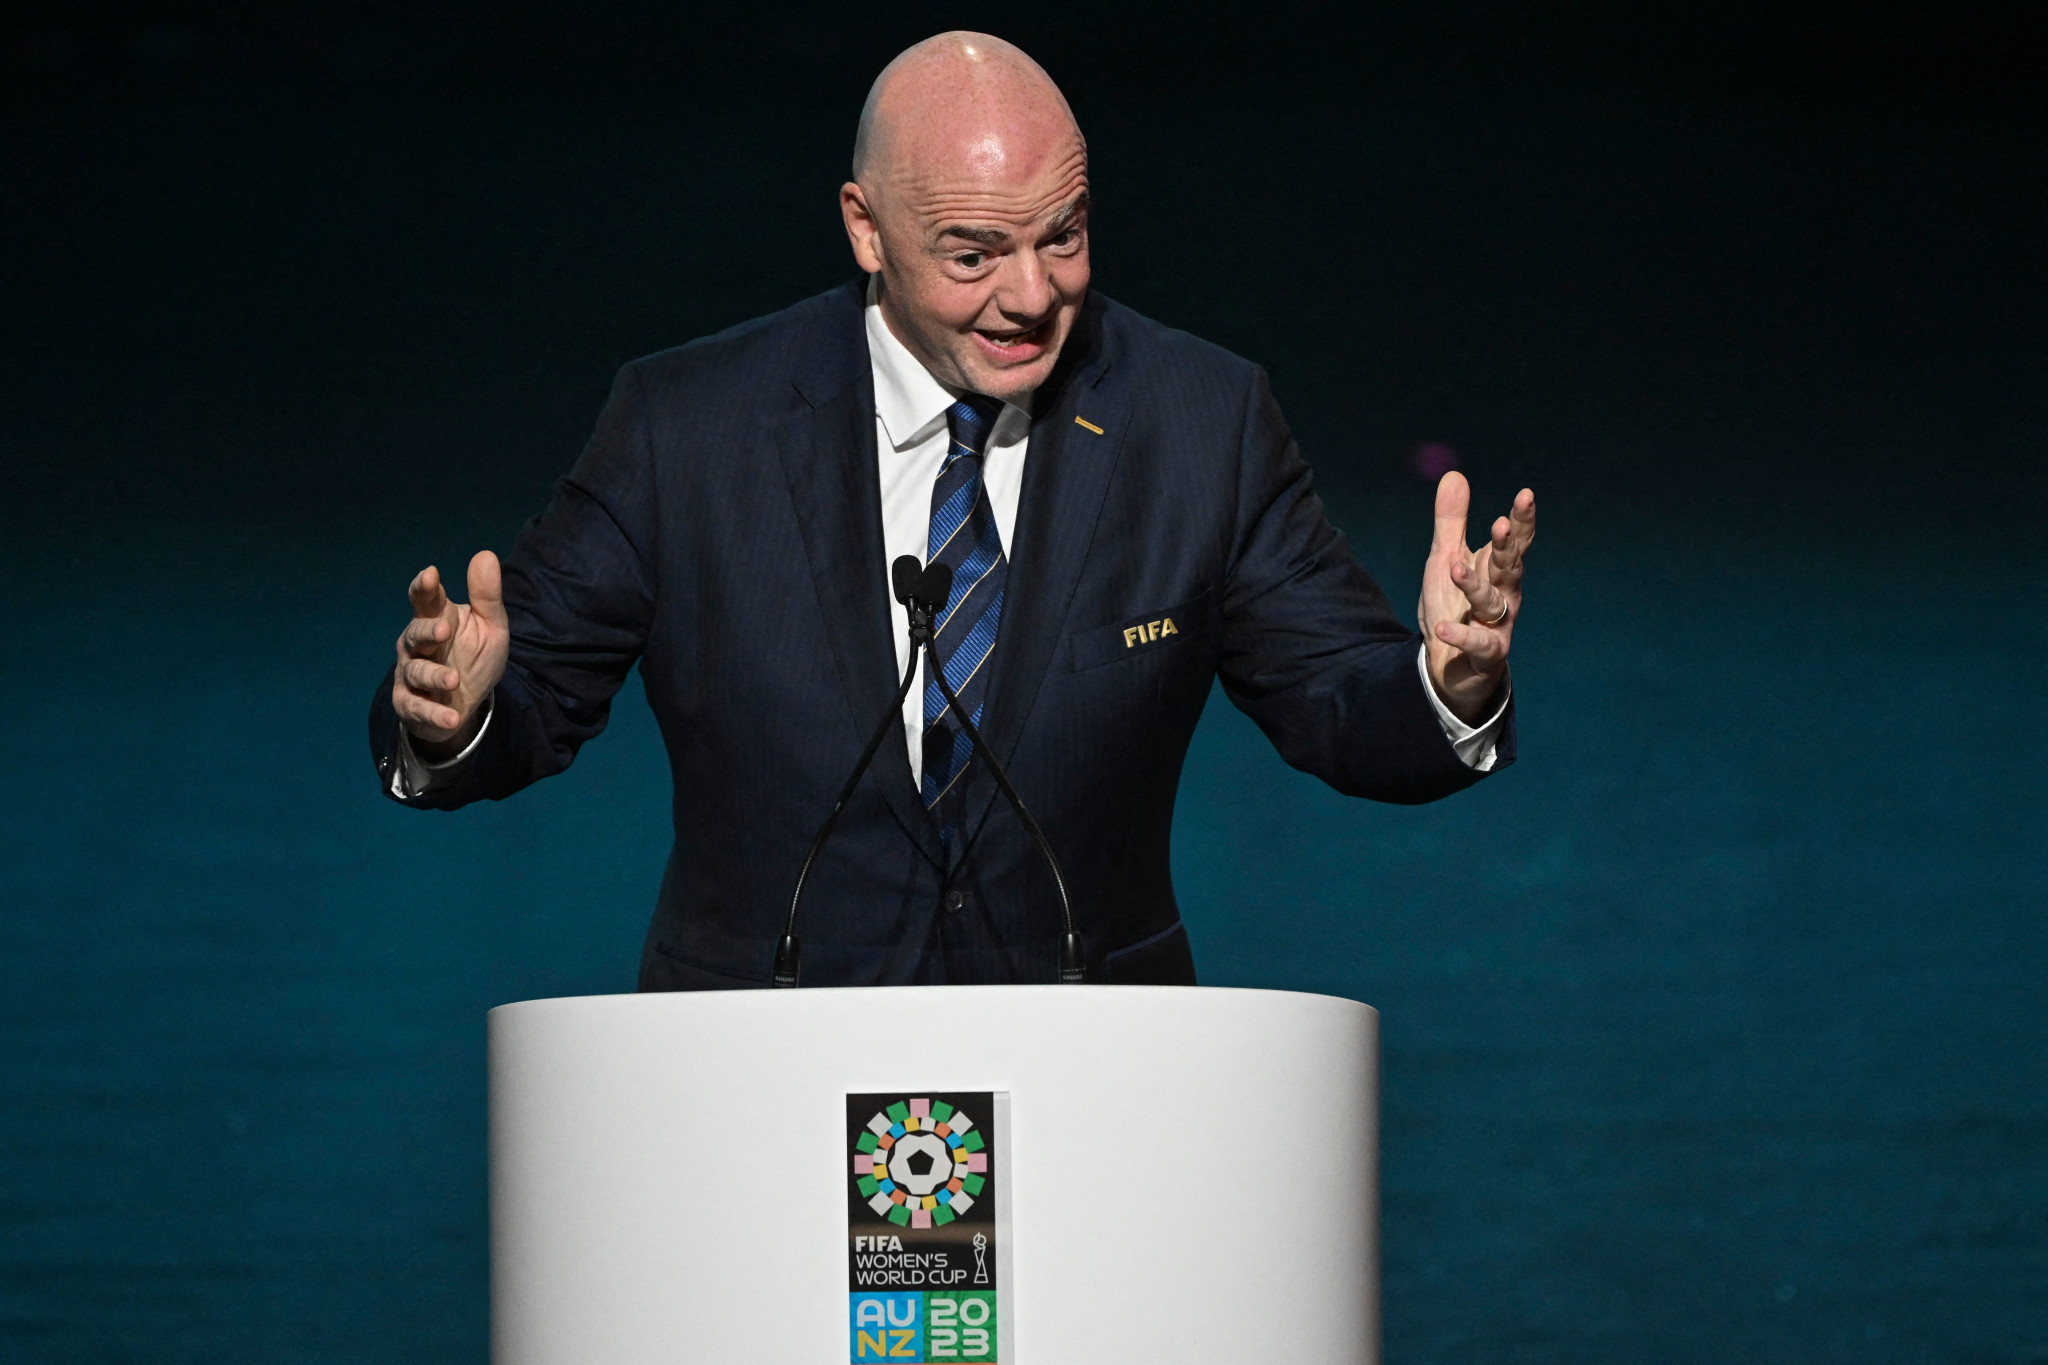 
FIFA President Gianni Infantino has called on the 32 participating teams to "focus on football" in response to the criticism of Qatar staging the World Cup ©Getty Images